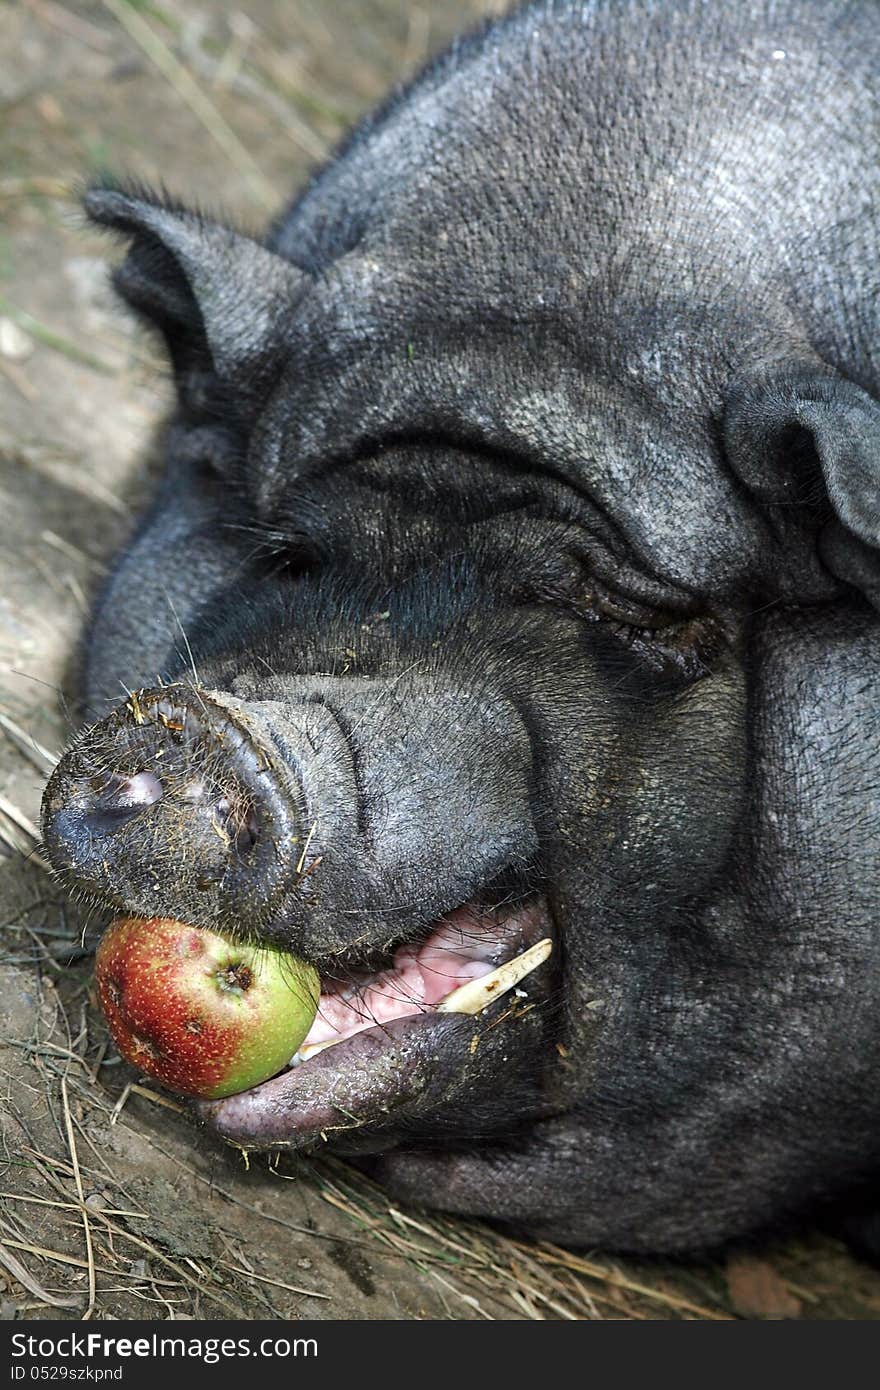 A big pot-bellied pig has an apple in his mouth